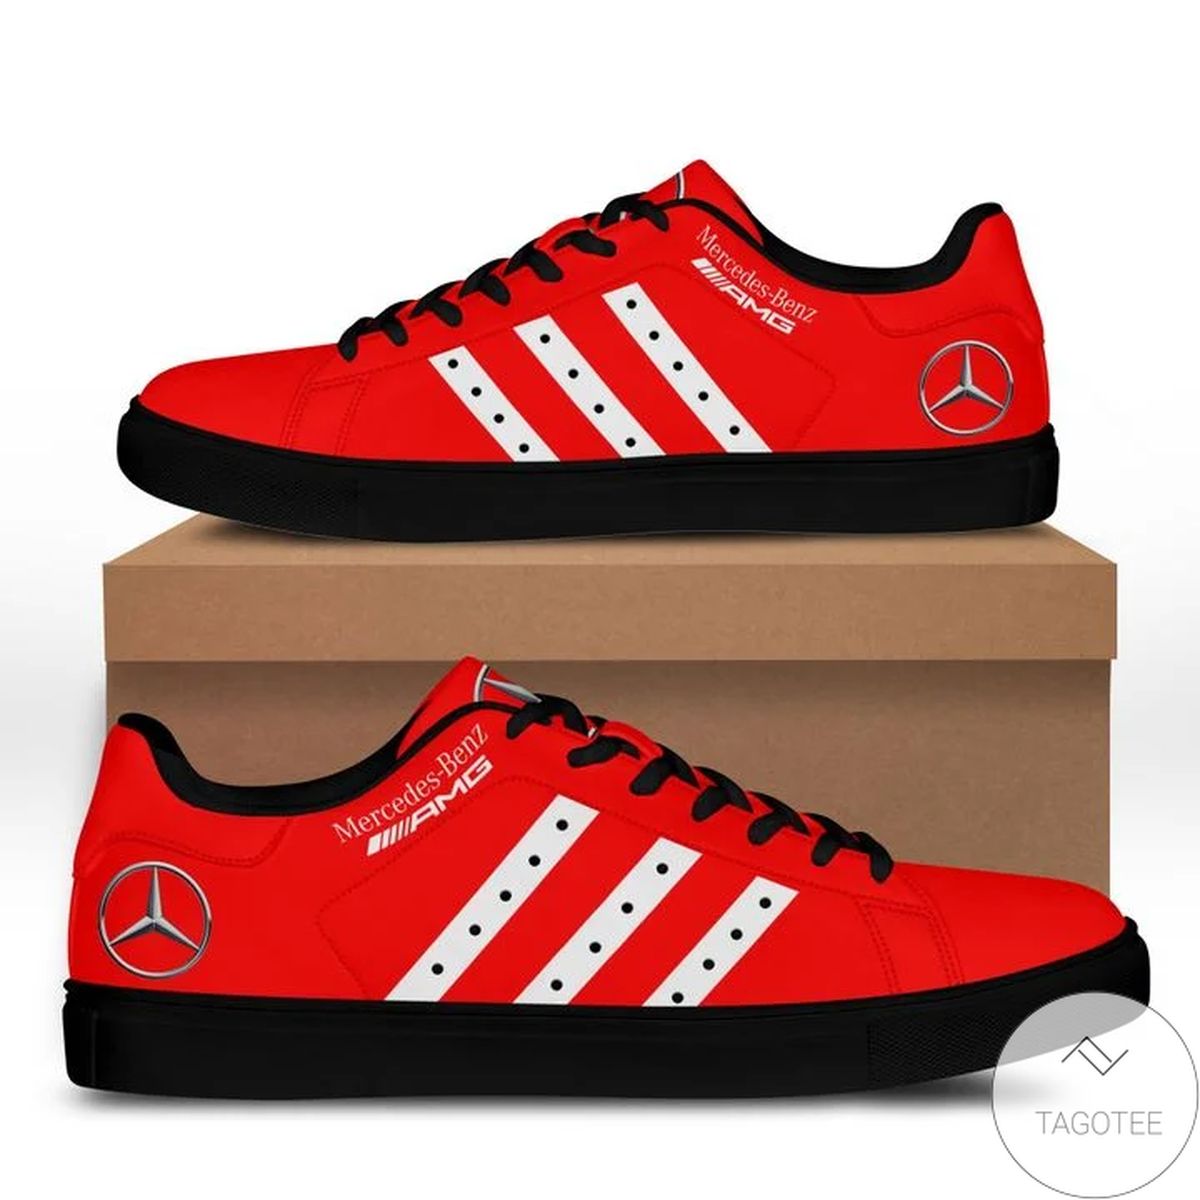 Mercedes Amg Stan Smith Shoes